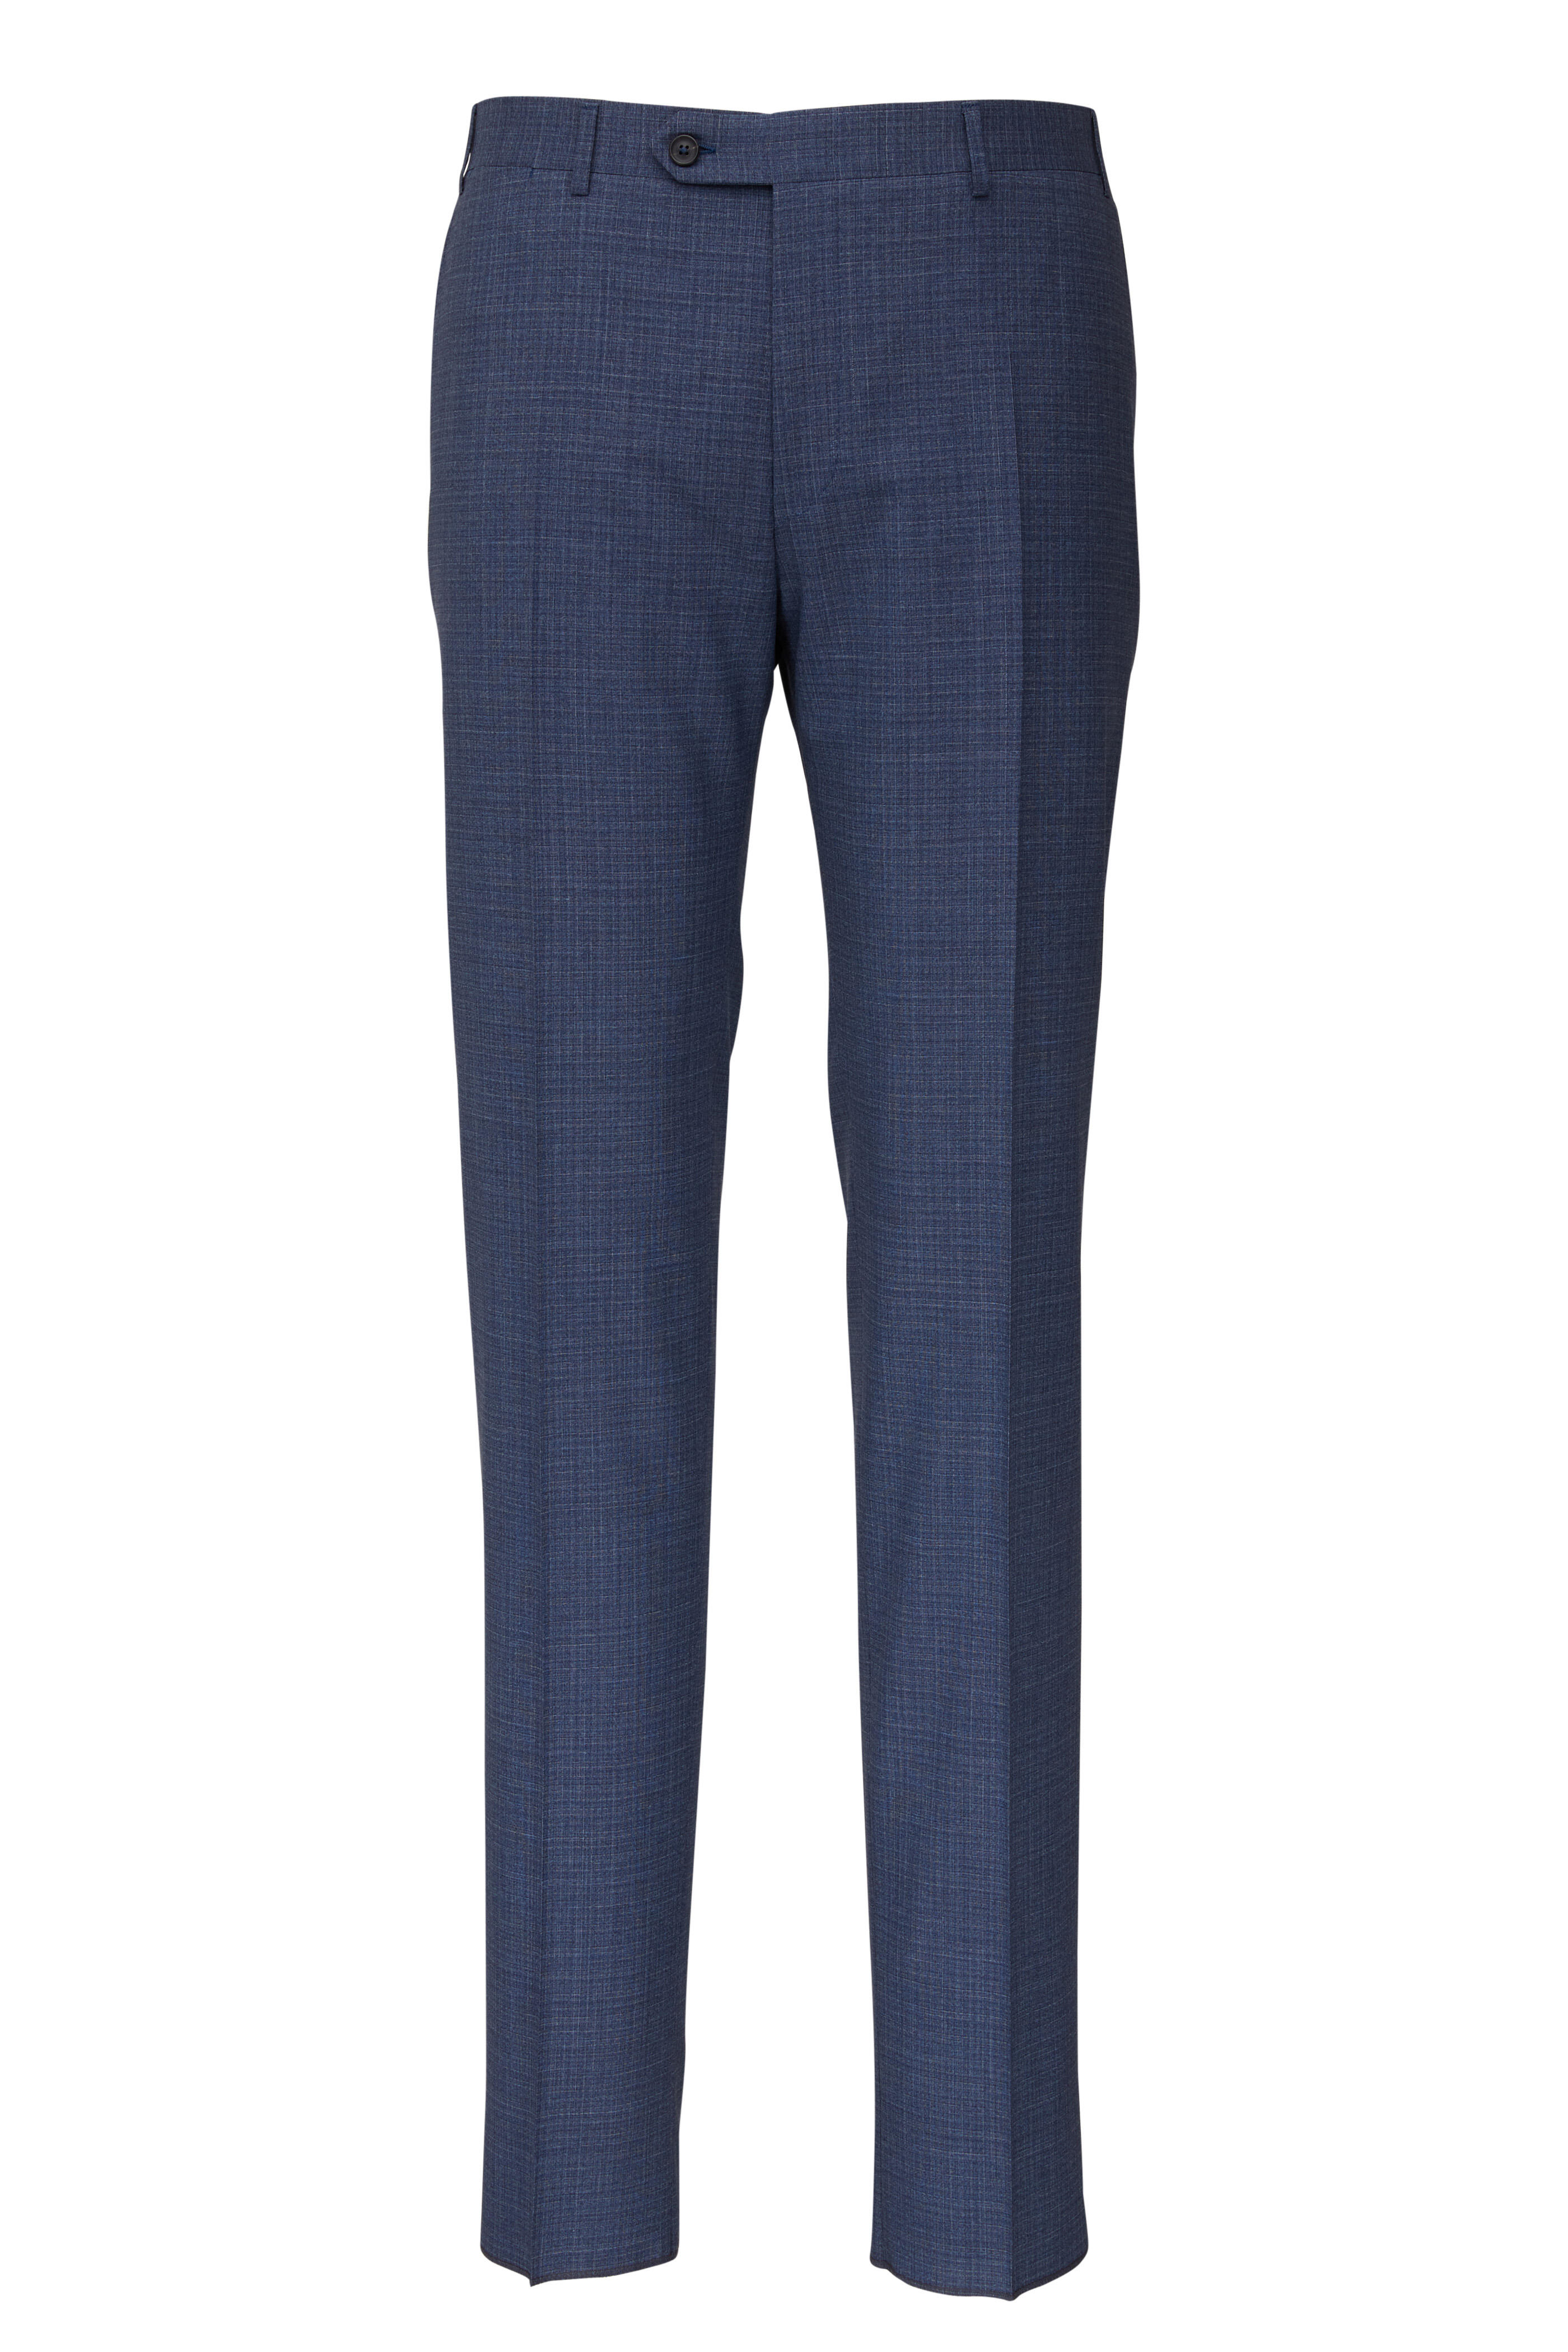 Canali - Exclusive Navy Tonal Plaid Suit | Mitchell Stores